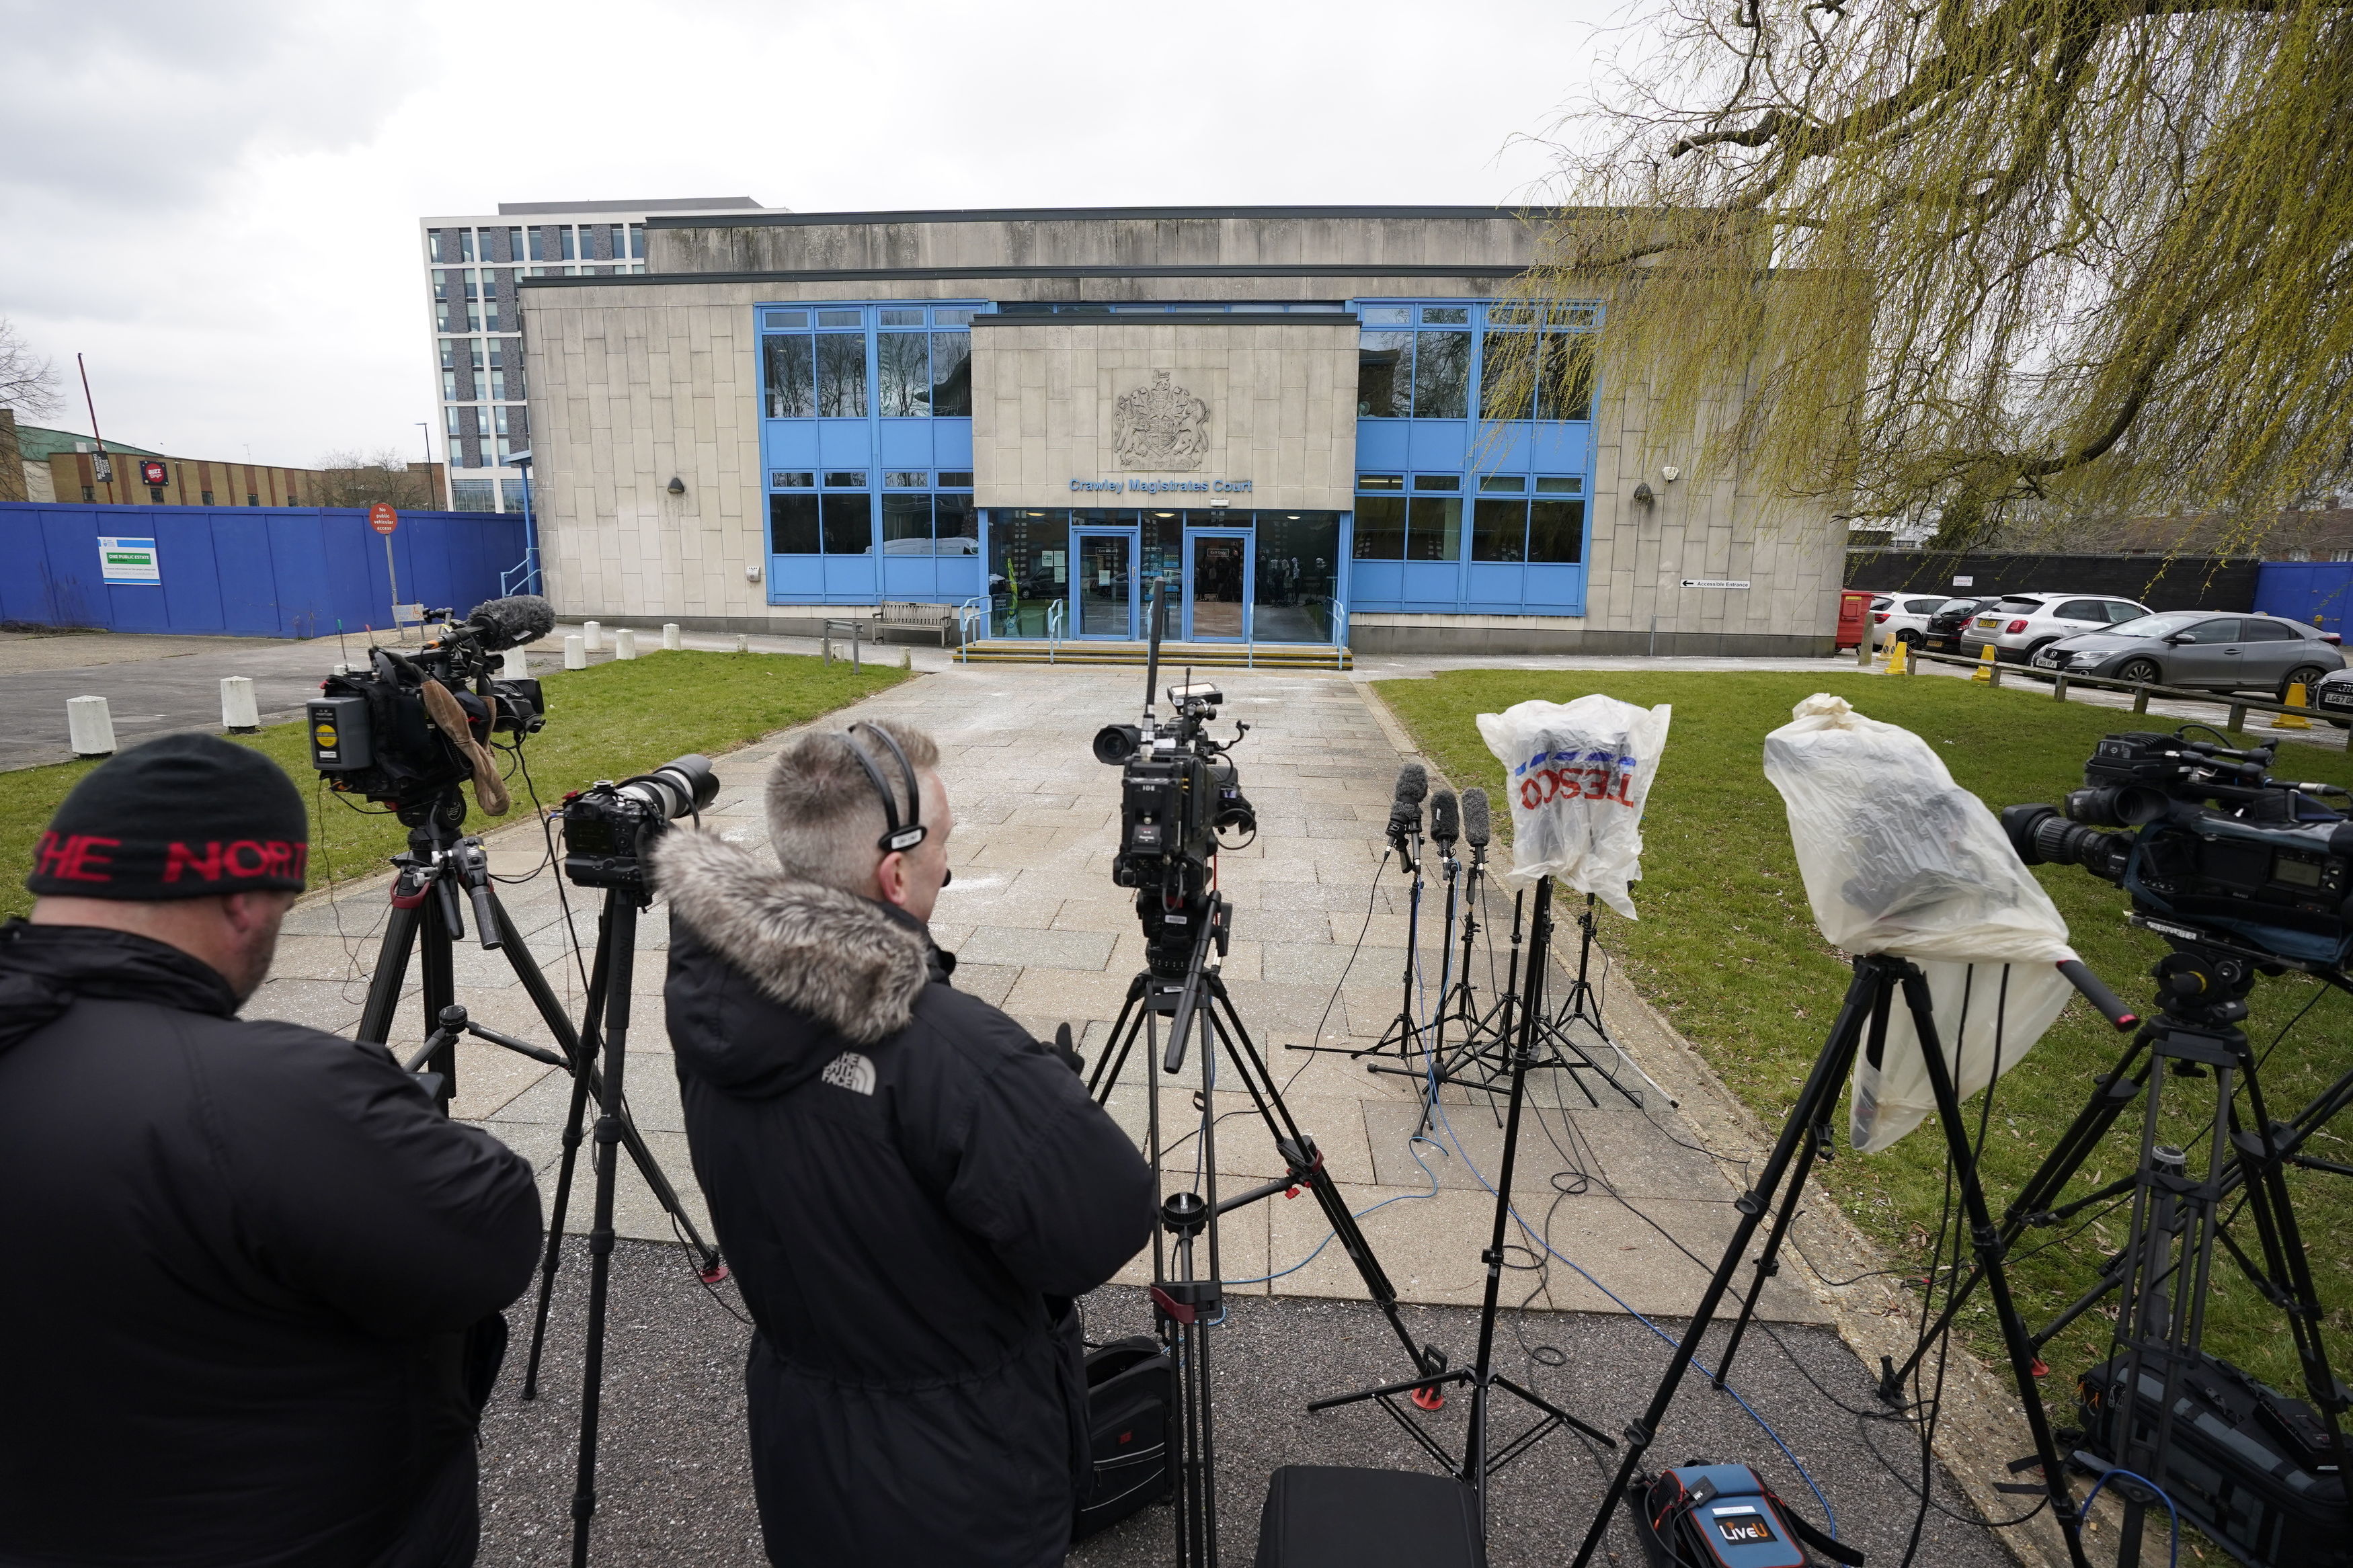 Media outside Crawley Magistrates Court where Constance Marten and Mark Gordon are due to appear